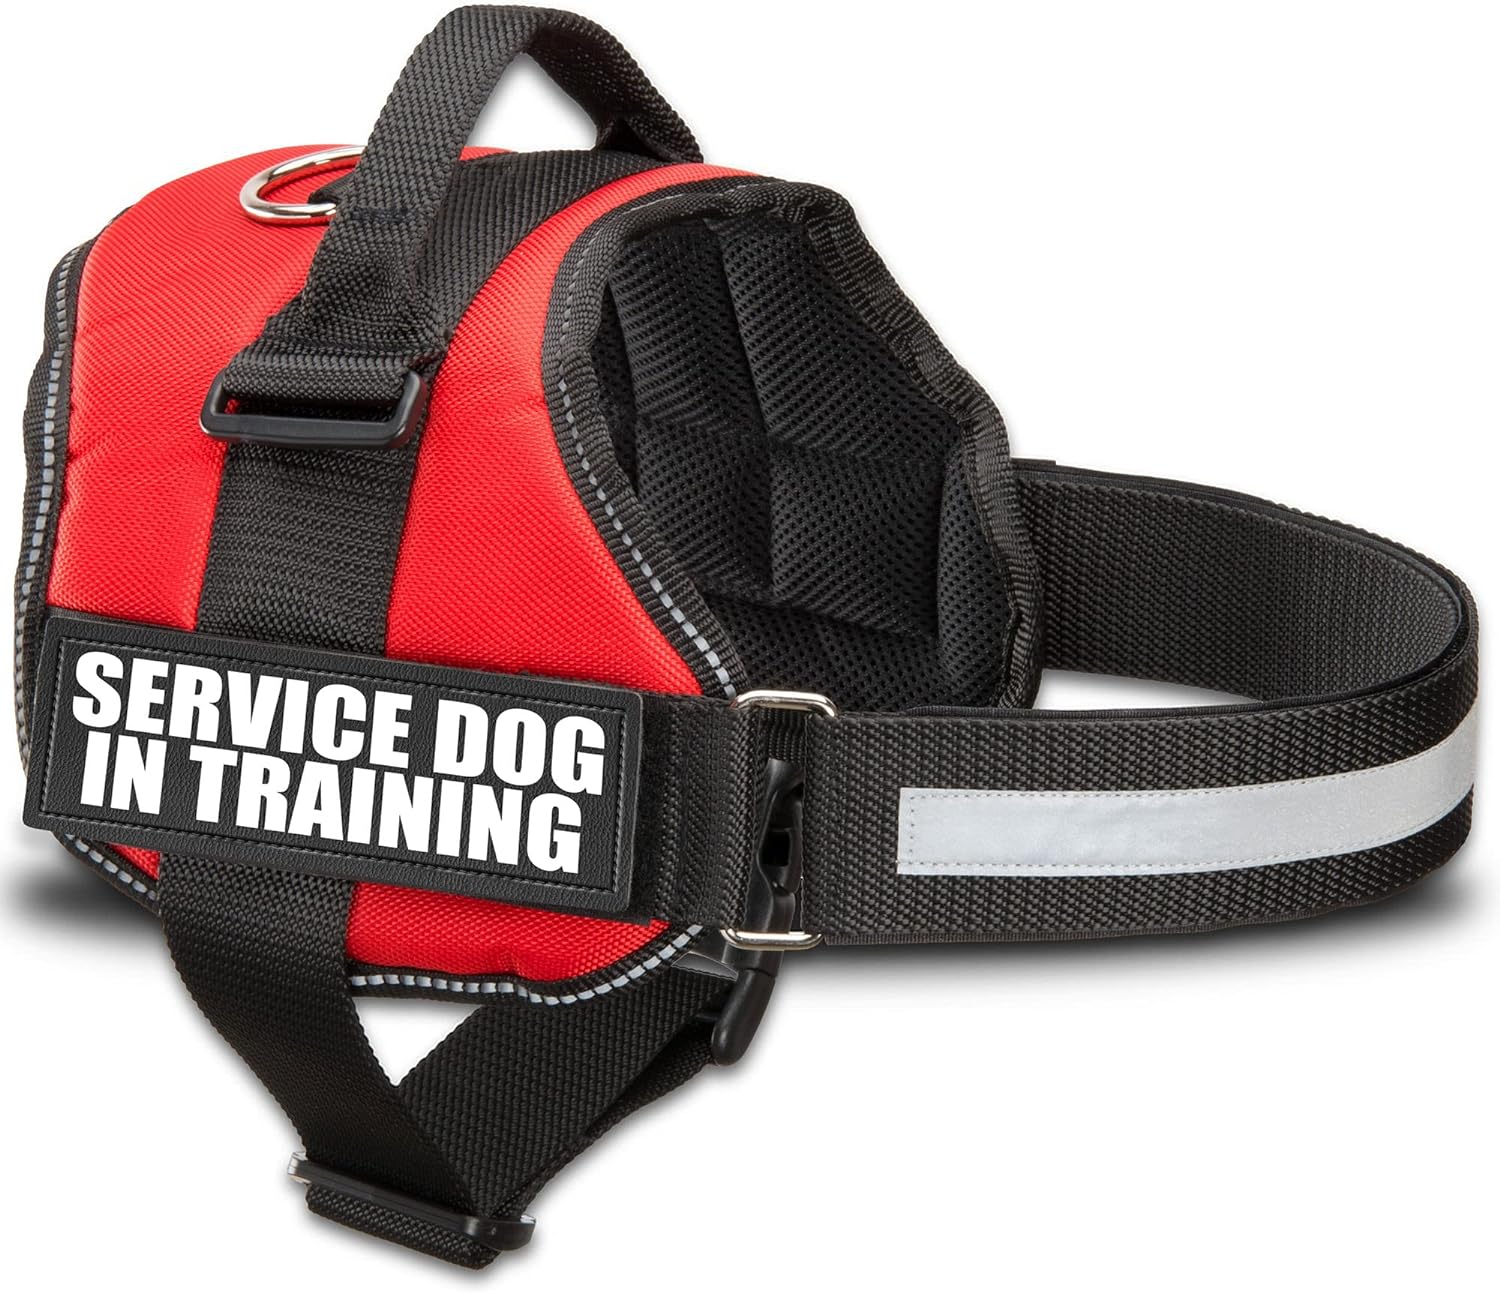 Industrial Puppy Service Dog In Training Vest With Hook and Loop Straps and Handle - Harnesses In Sizes From XXS to XXL - Service Dog Vest Harness Features Reflective Patch and Comfortable Mesh Design